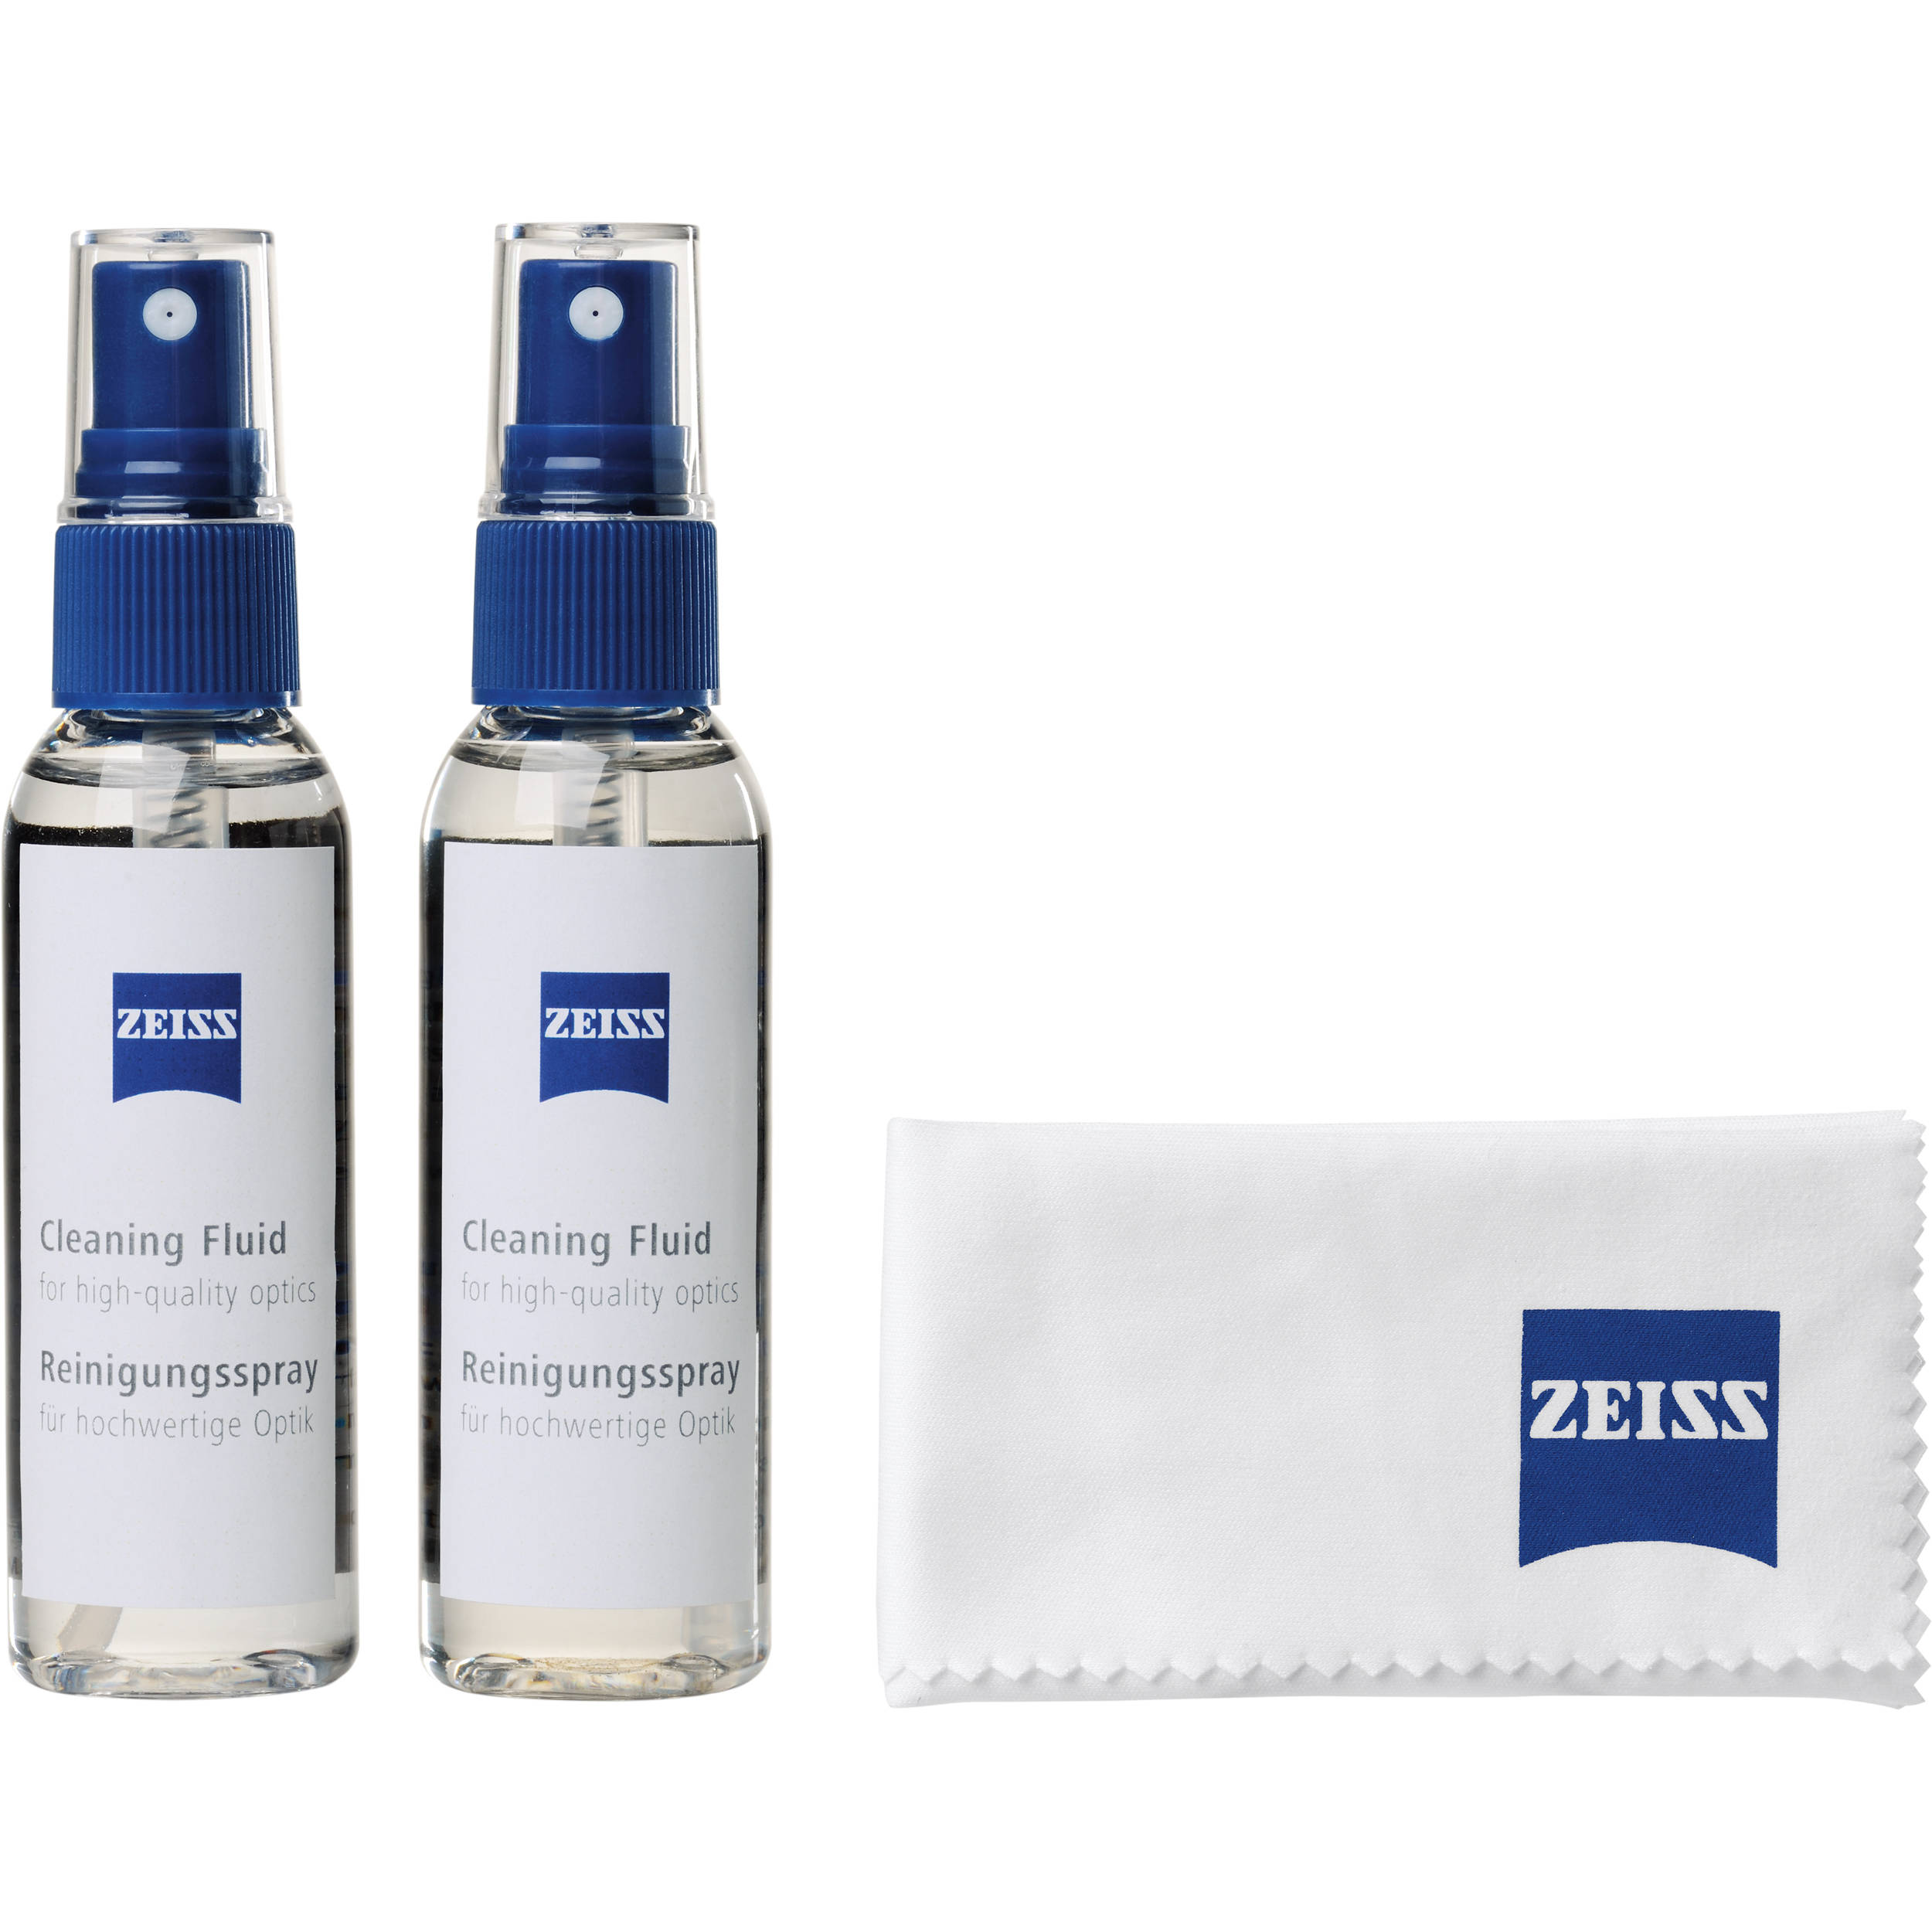 ZEISS ZEISS Cleaning Fluid (2 oz, 2-Pack) 2096-686 B&H Photo